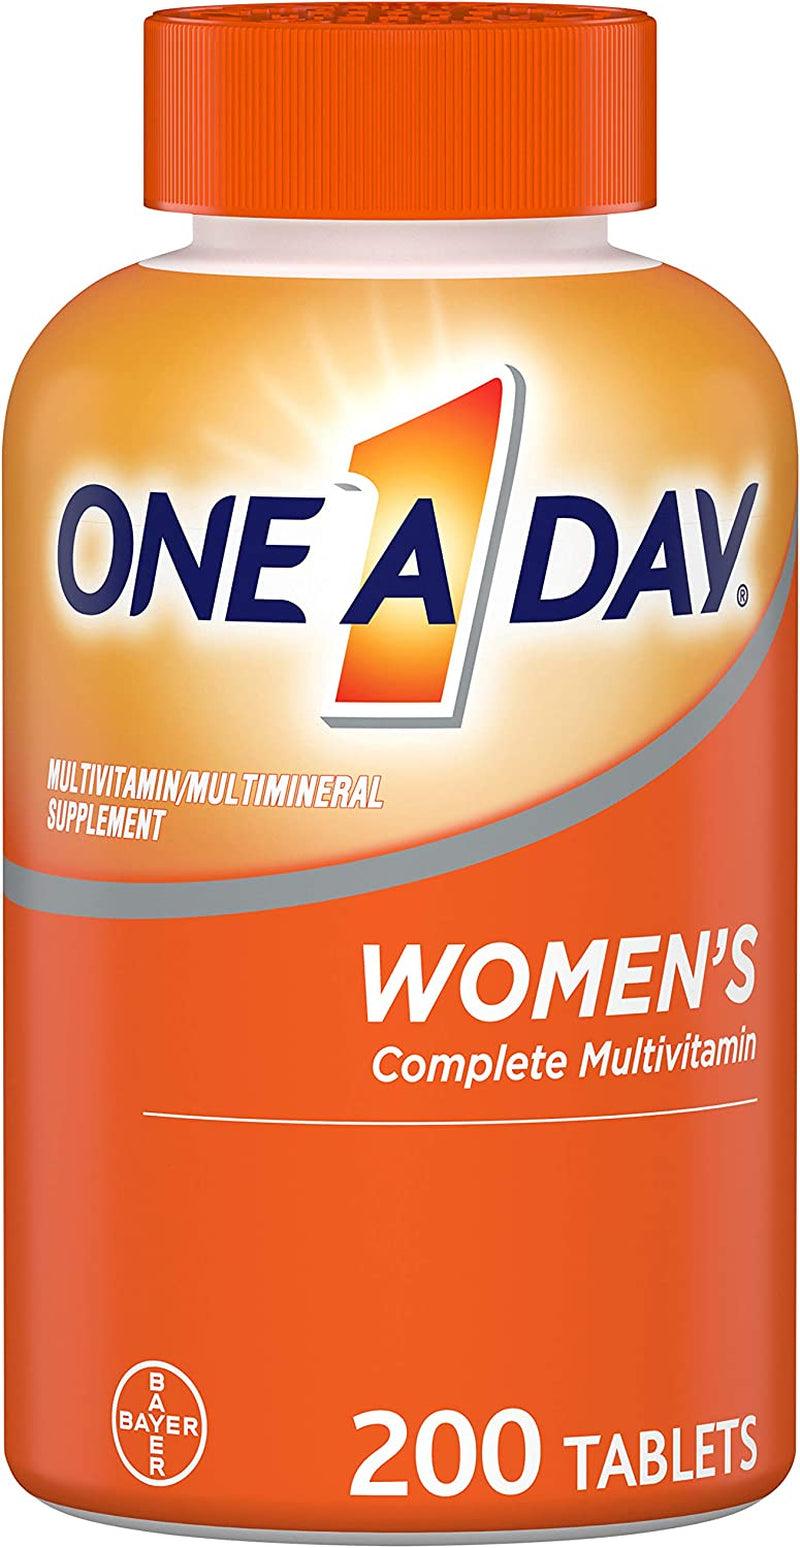 One a Day Women’S Multivitamin, Supplement with Vitamin A, Vitamin C, Vitamin D, Vitamin E and Zinc for Immune Health Support, B12, Biotin, Calcium & More, 200 Count